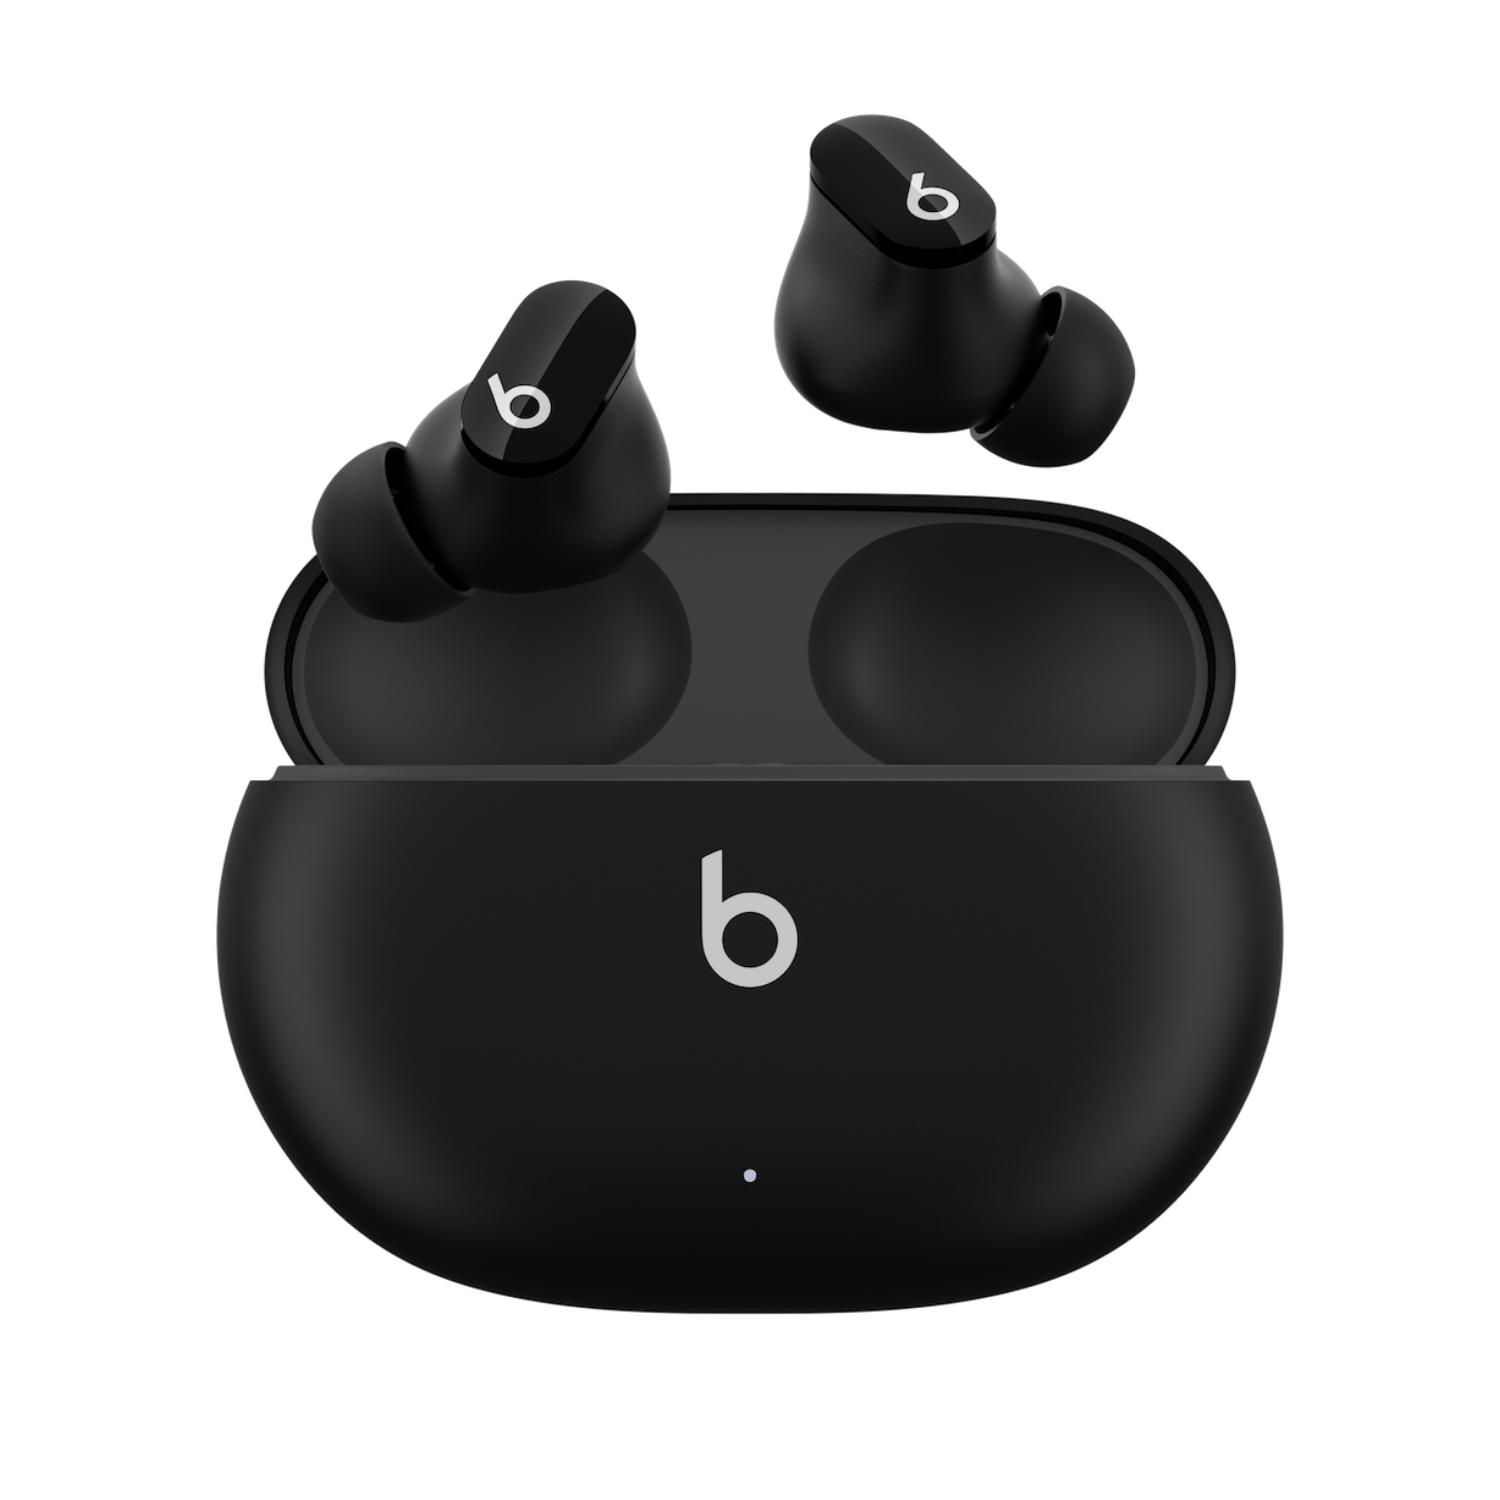 BEATS Studio Buds Wireless Bluetooth Noise-Cancelling Earbuds - Black, Black